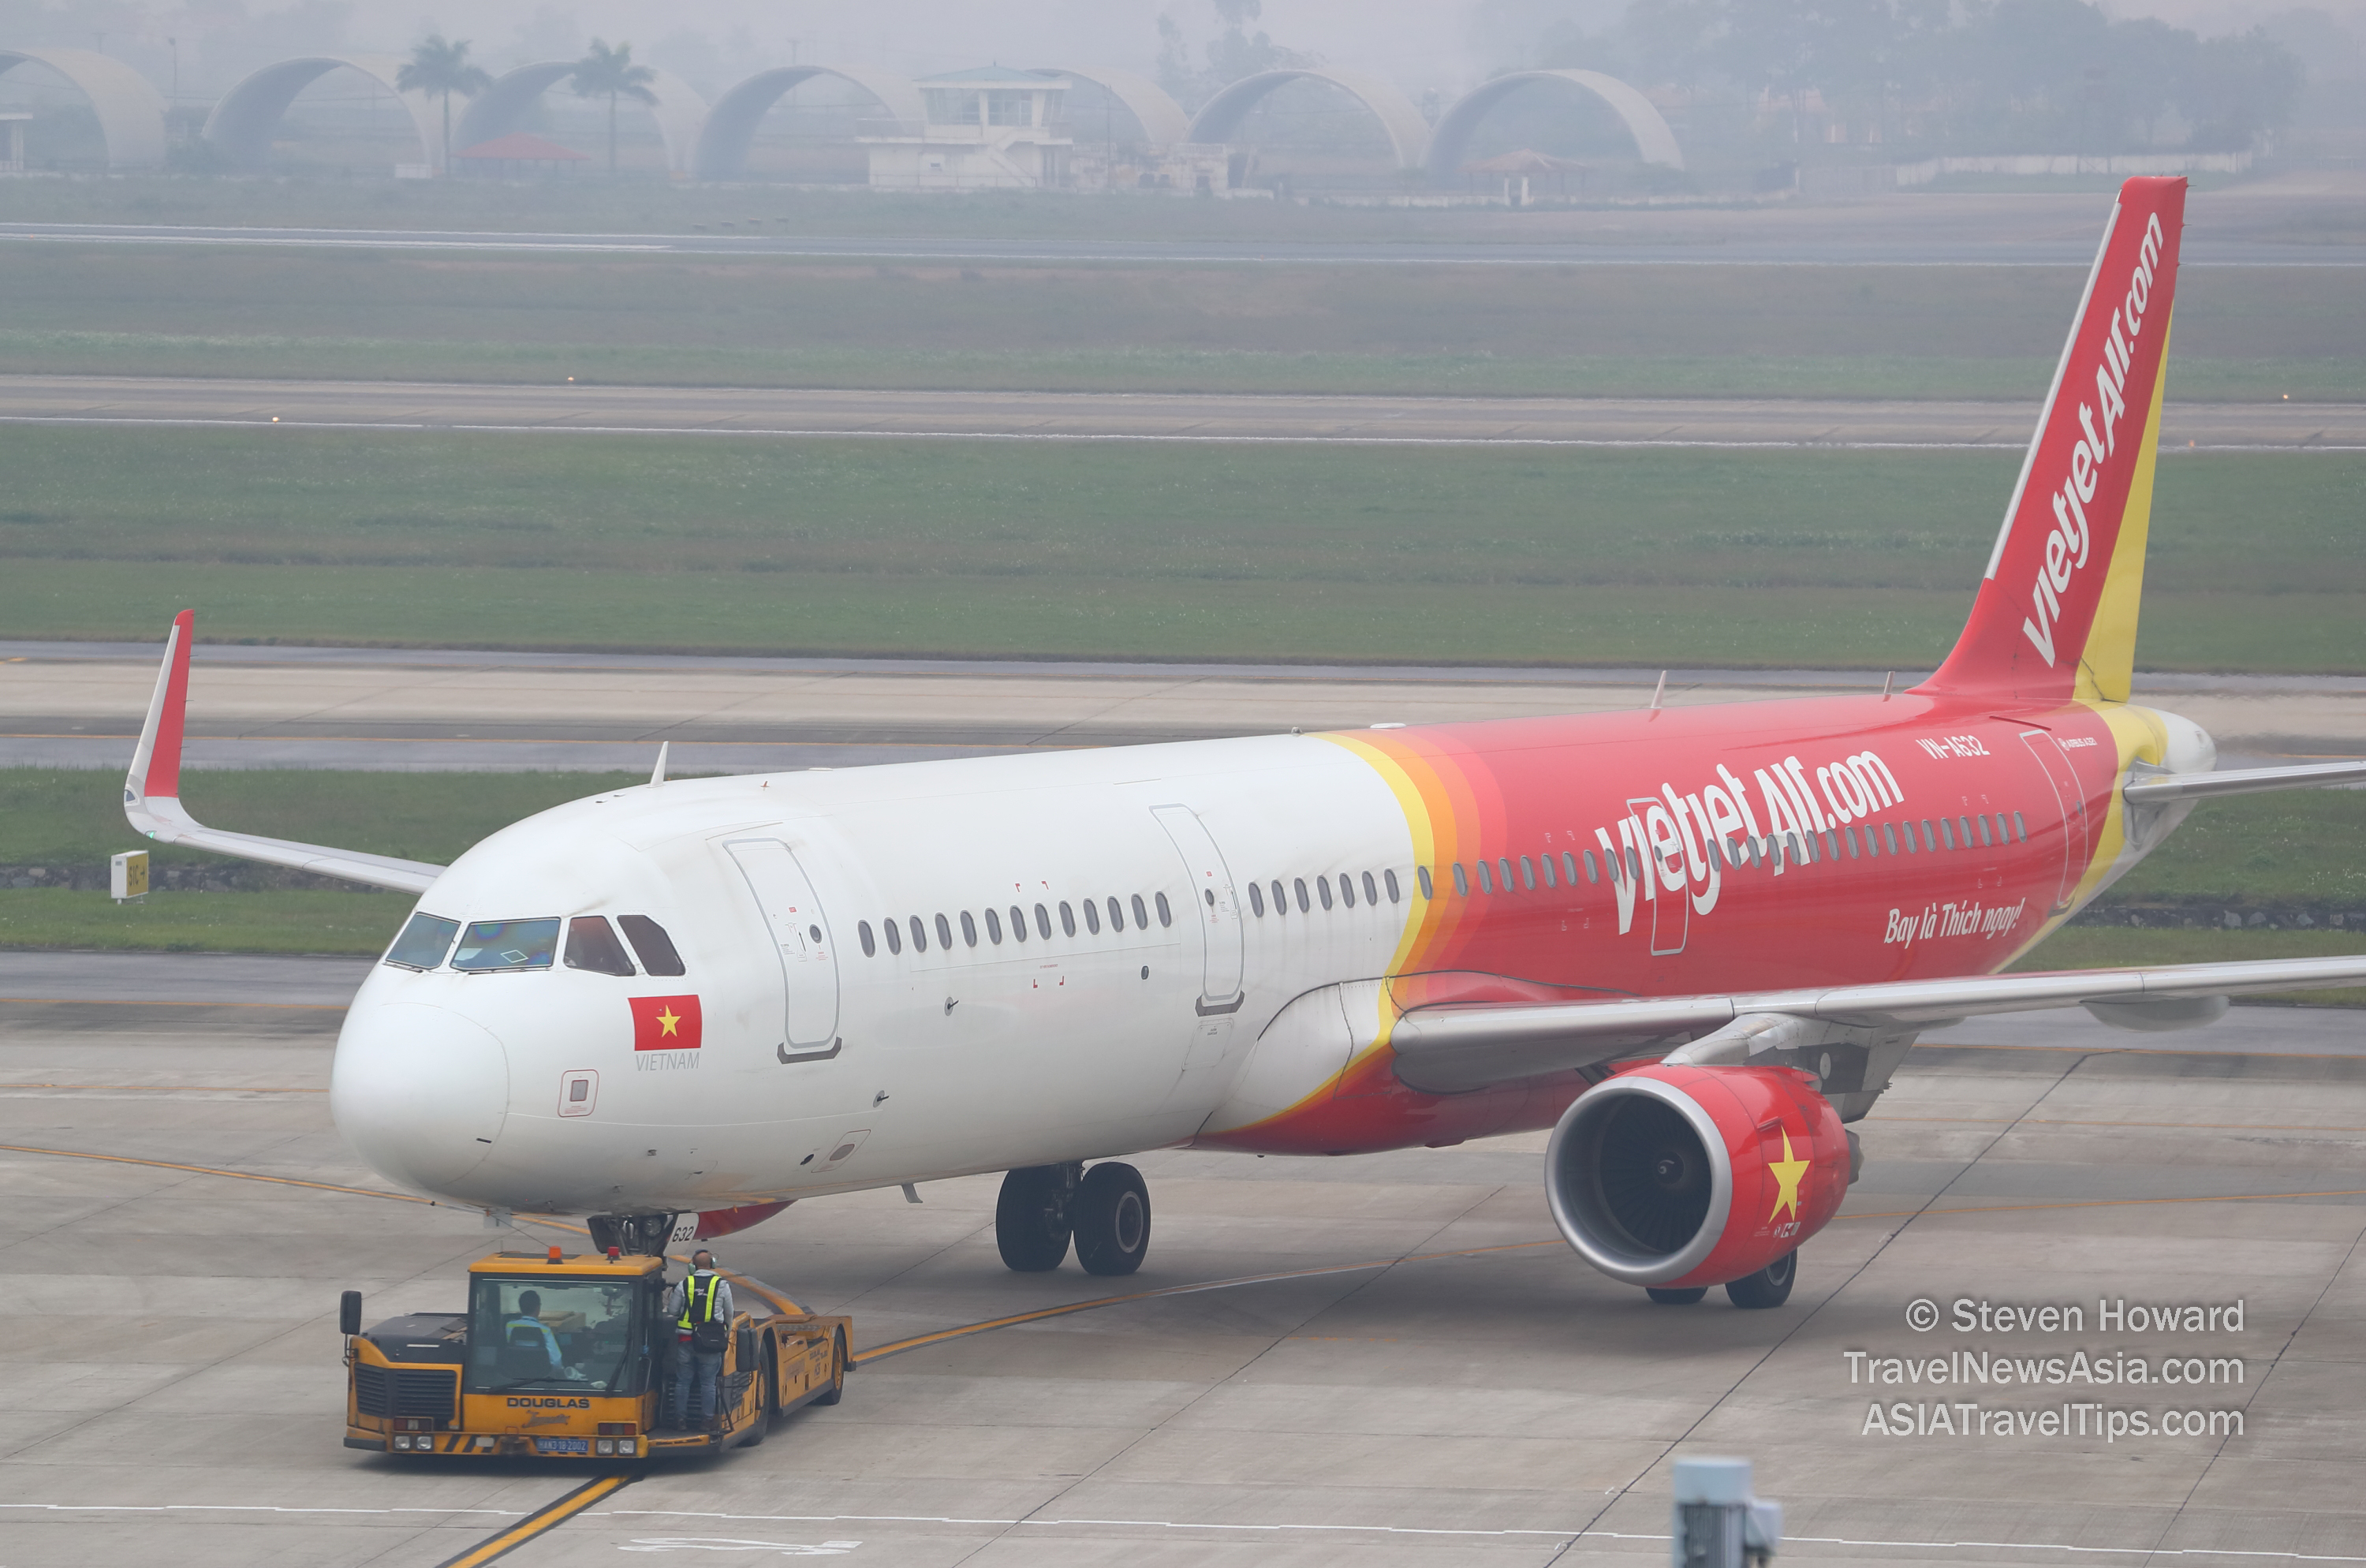 Vietjet Airbus A321 reg: VN-A632. Picture by Steven Howard of TravelNewsAsia.com Click to enlarge.